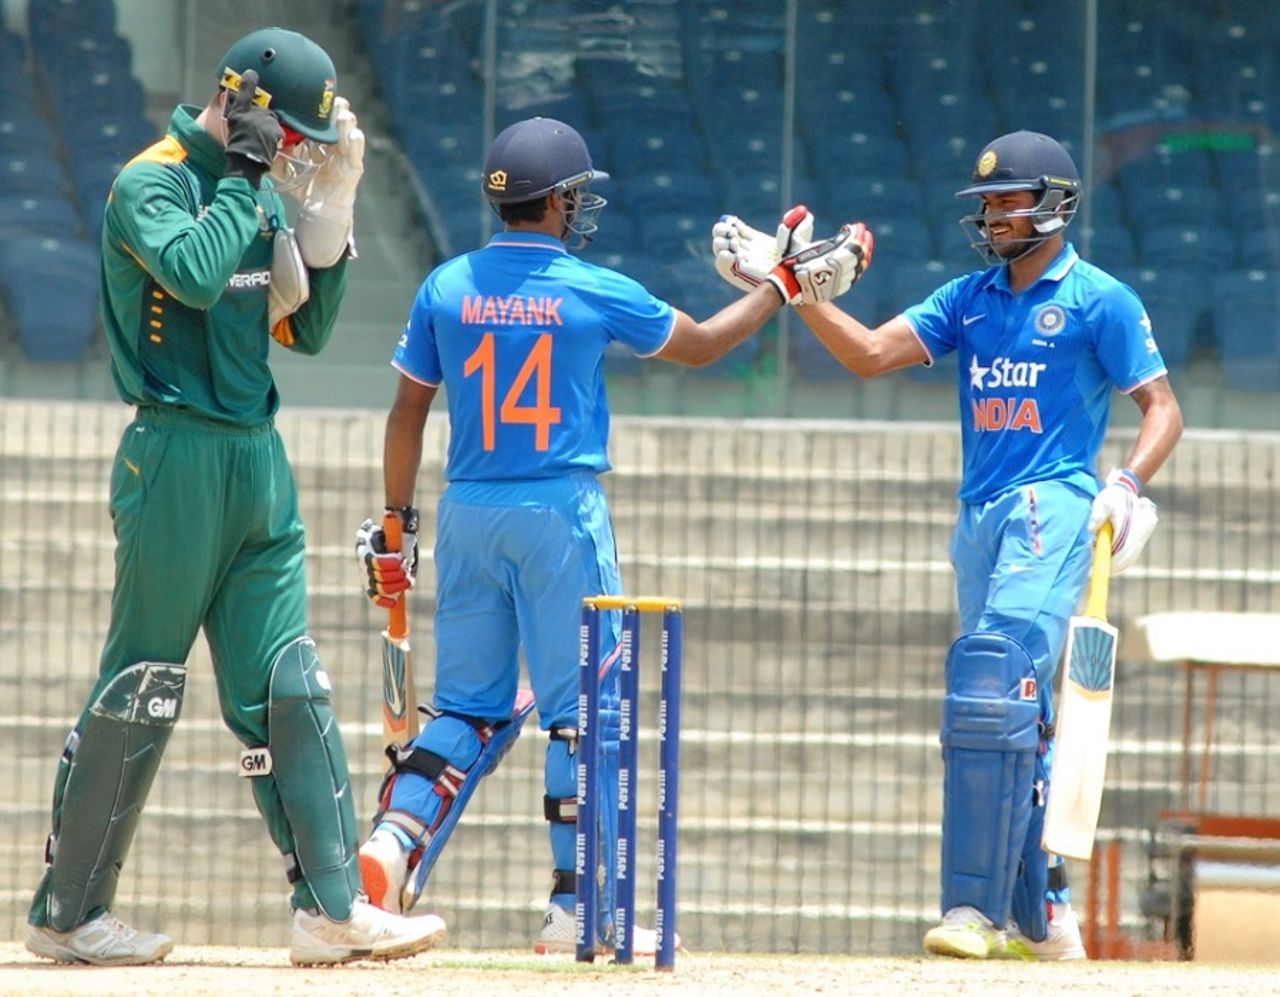 Mayank Agarwal and Manish Pandey added 203 runs for the second wicket, India v South Africa, A-team tri-series, August 13, 2015